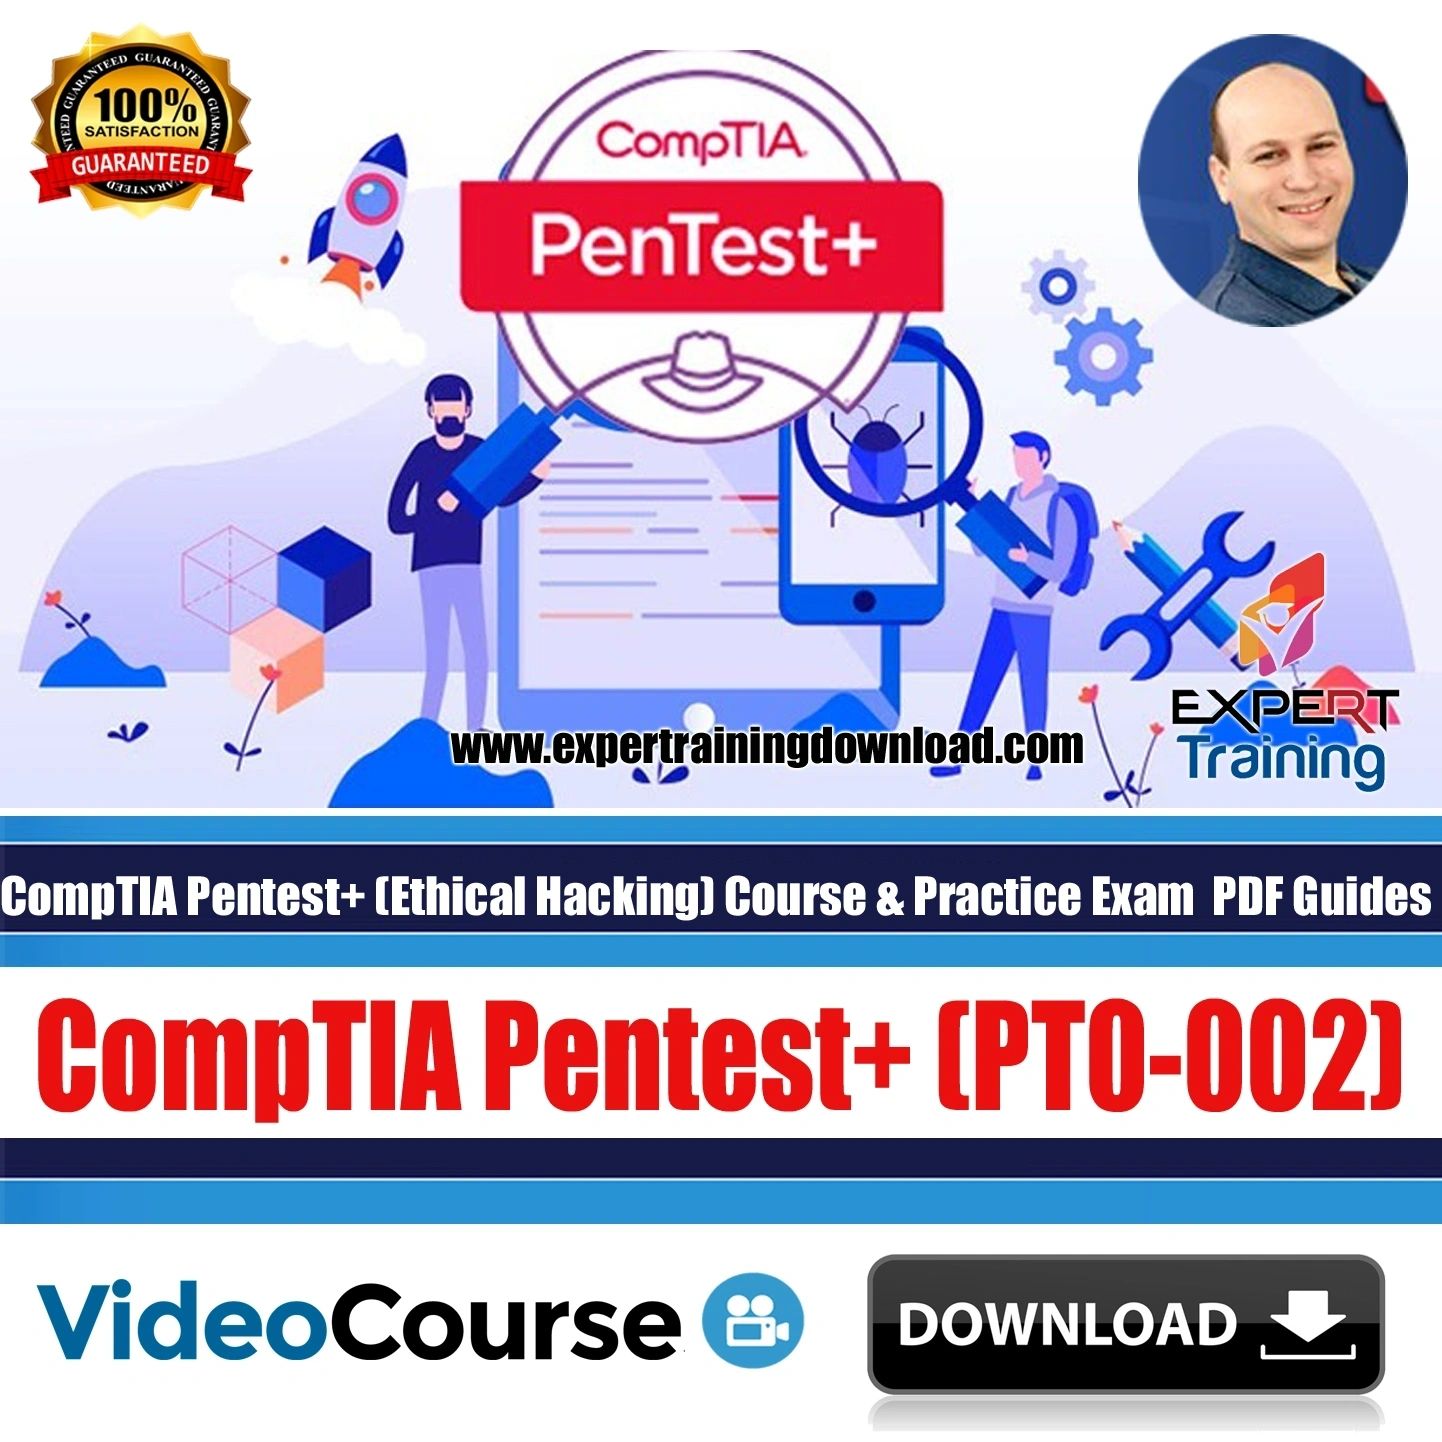 CompTIA Pentest+ (PT0?002) (Ethical Hacking) Course & Practice Exam PDF Guides